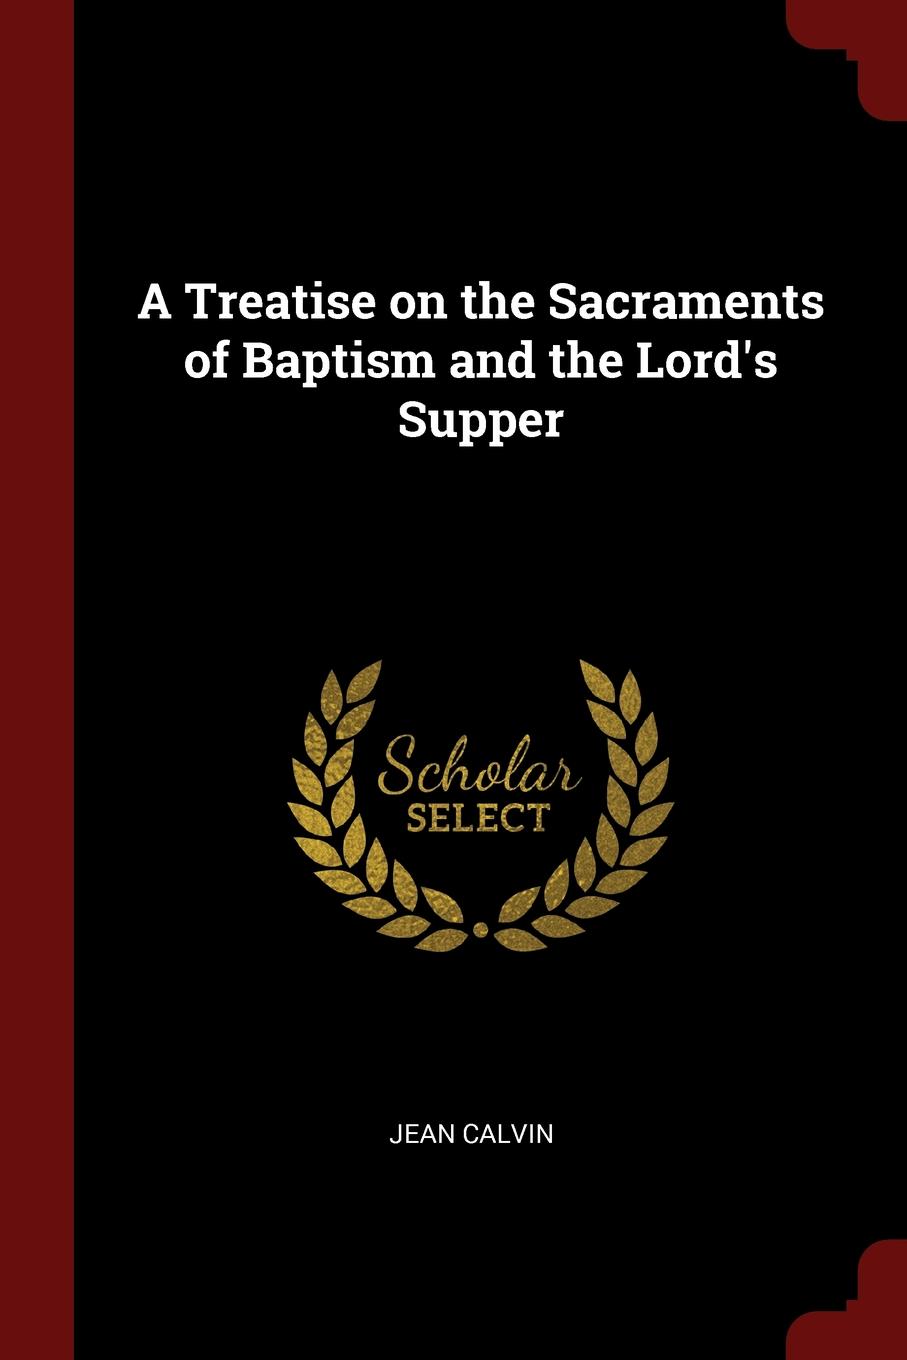 A Treatise on the Sacraments of Baptism and the Lord.s Supper